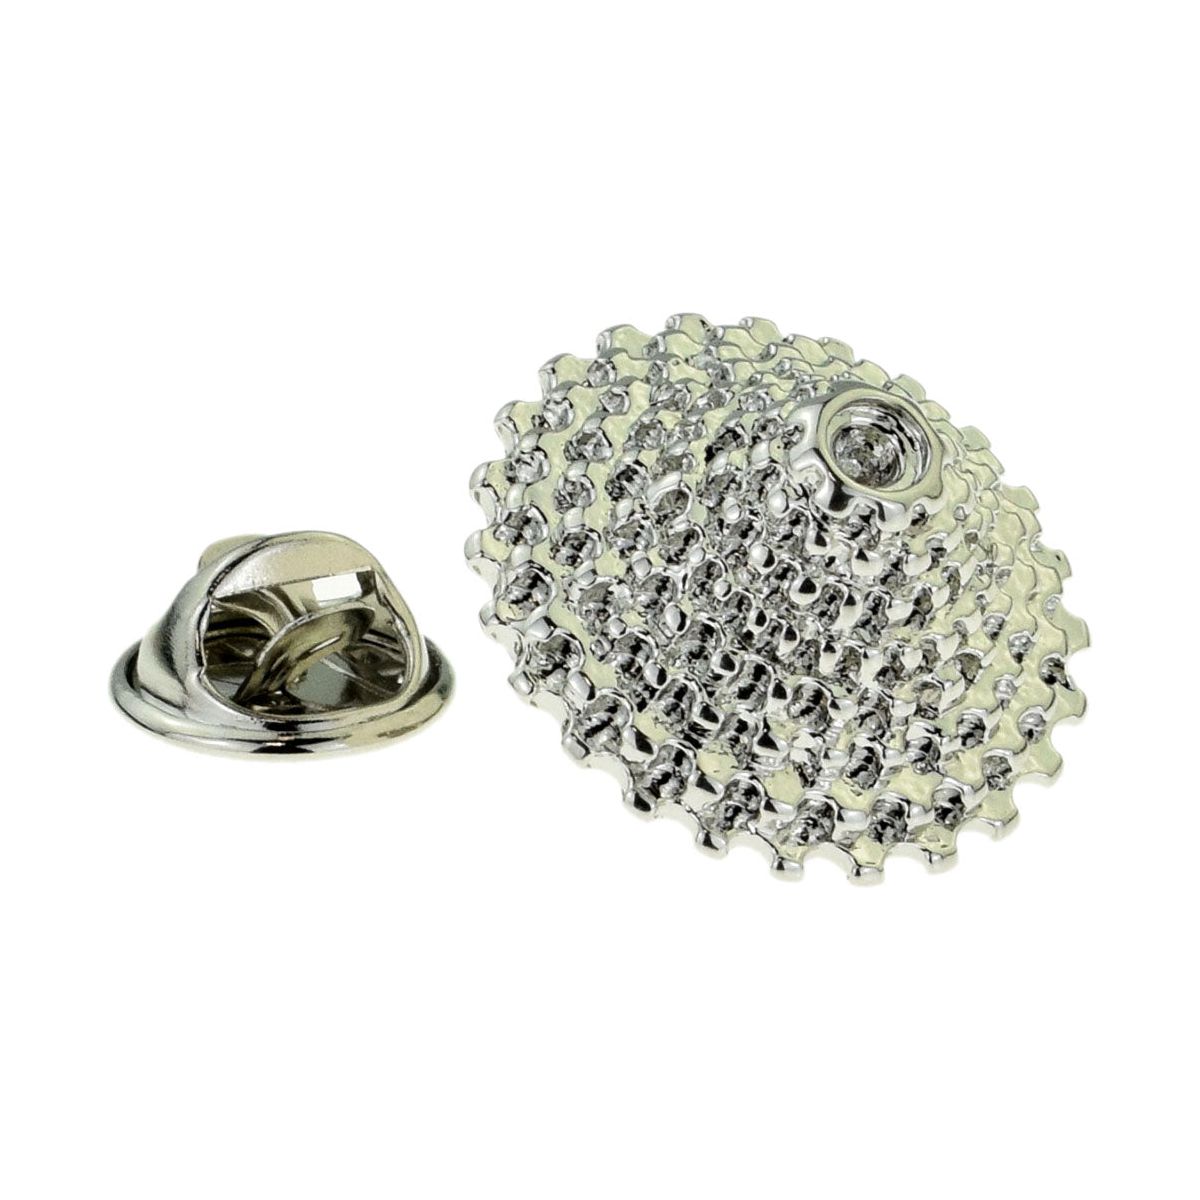 Bicycle Gears Lapel Pin Badge - Ashton and Finch